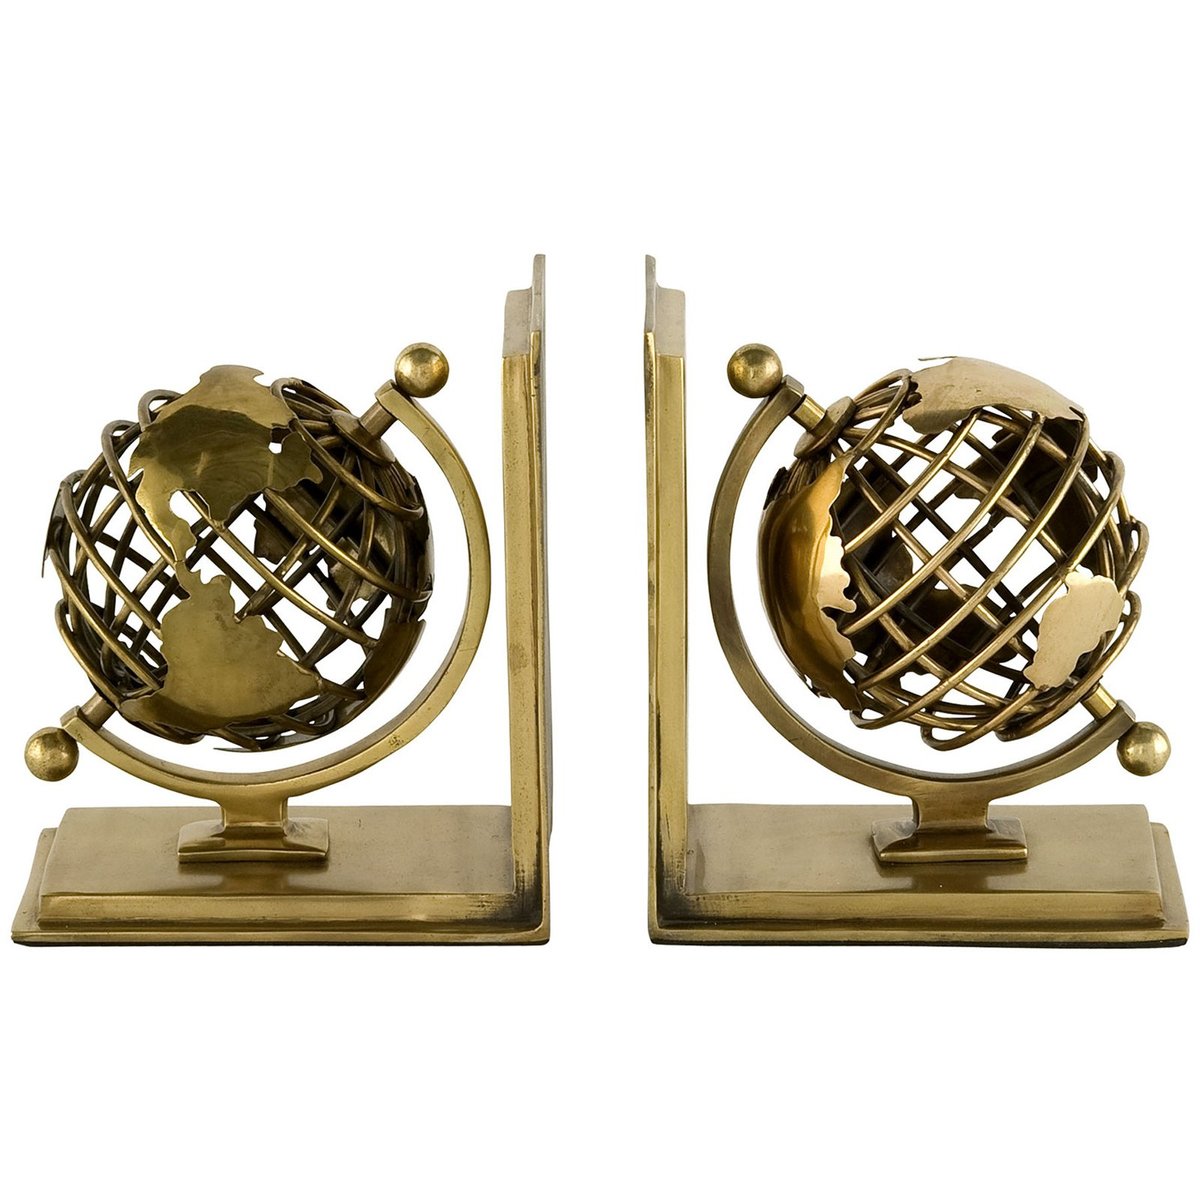 Globe Bookends, Set of 2